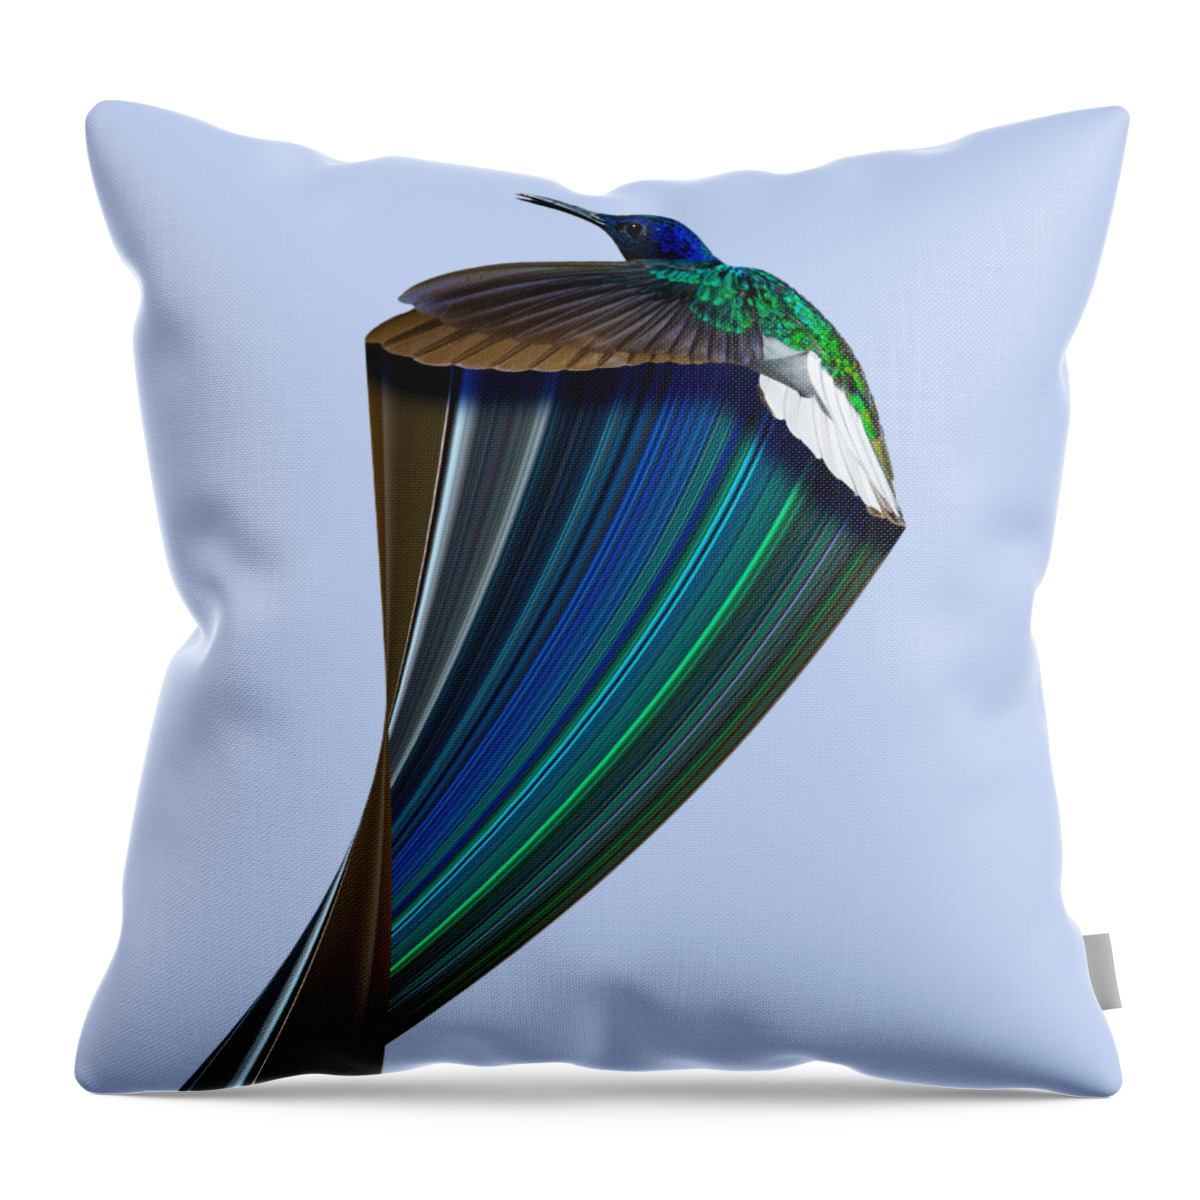 Exotic Throw Pillow featuring the digital art Hummingbird Pixel Stretch 2 by Pelo Blanco Photo